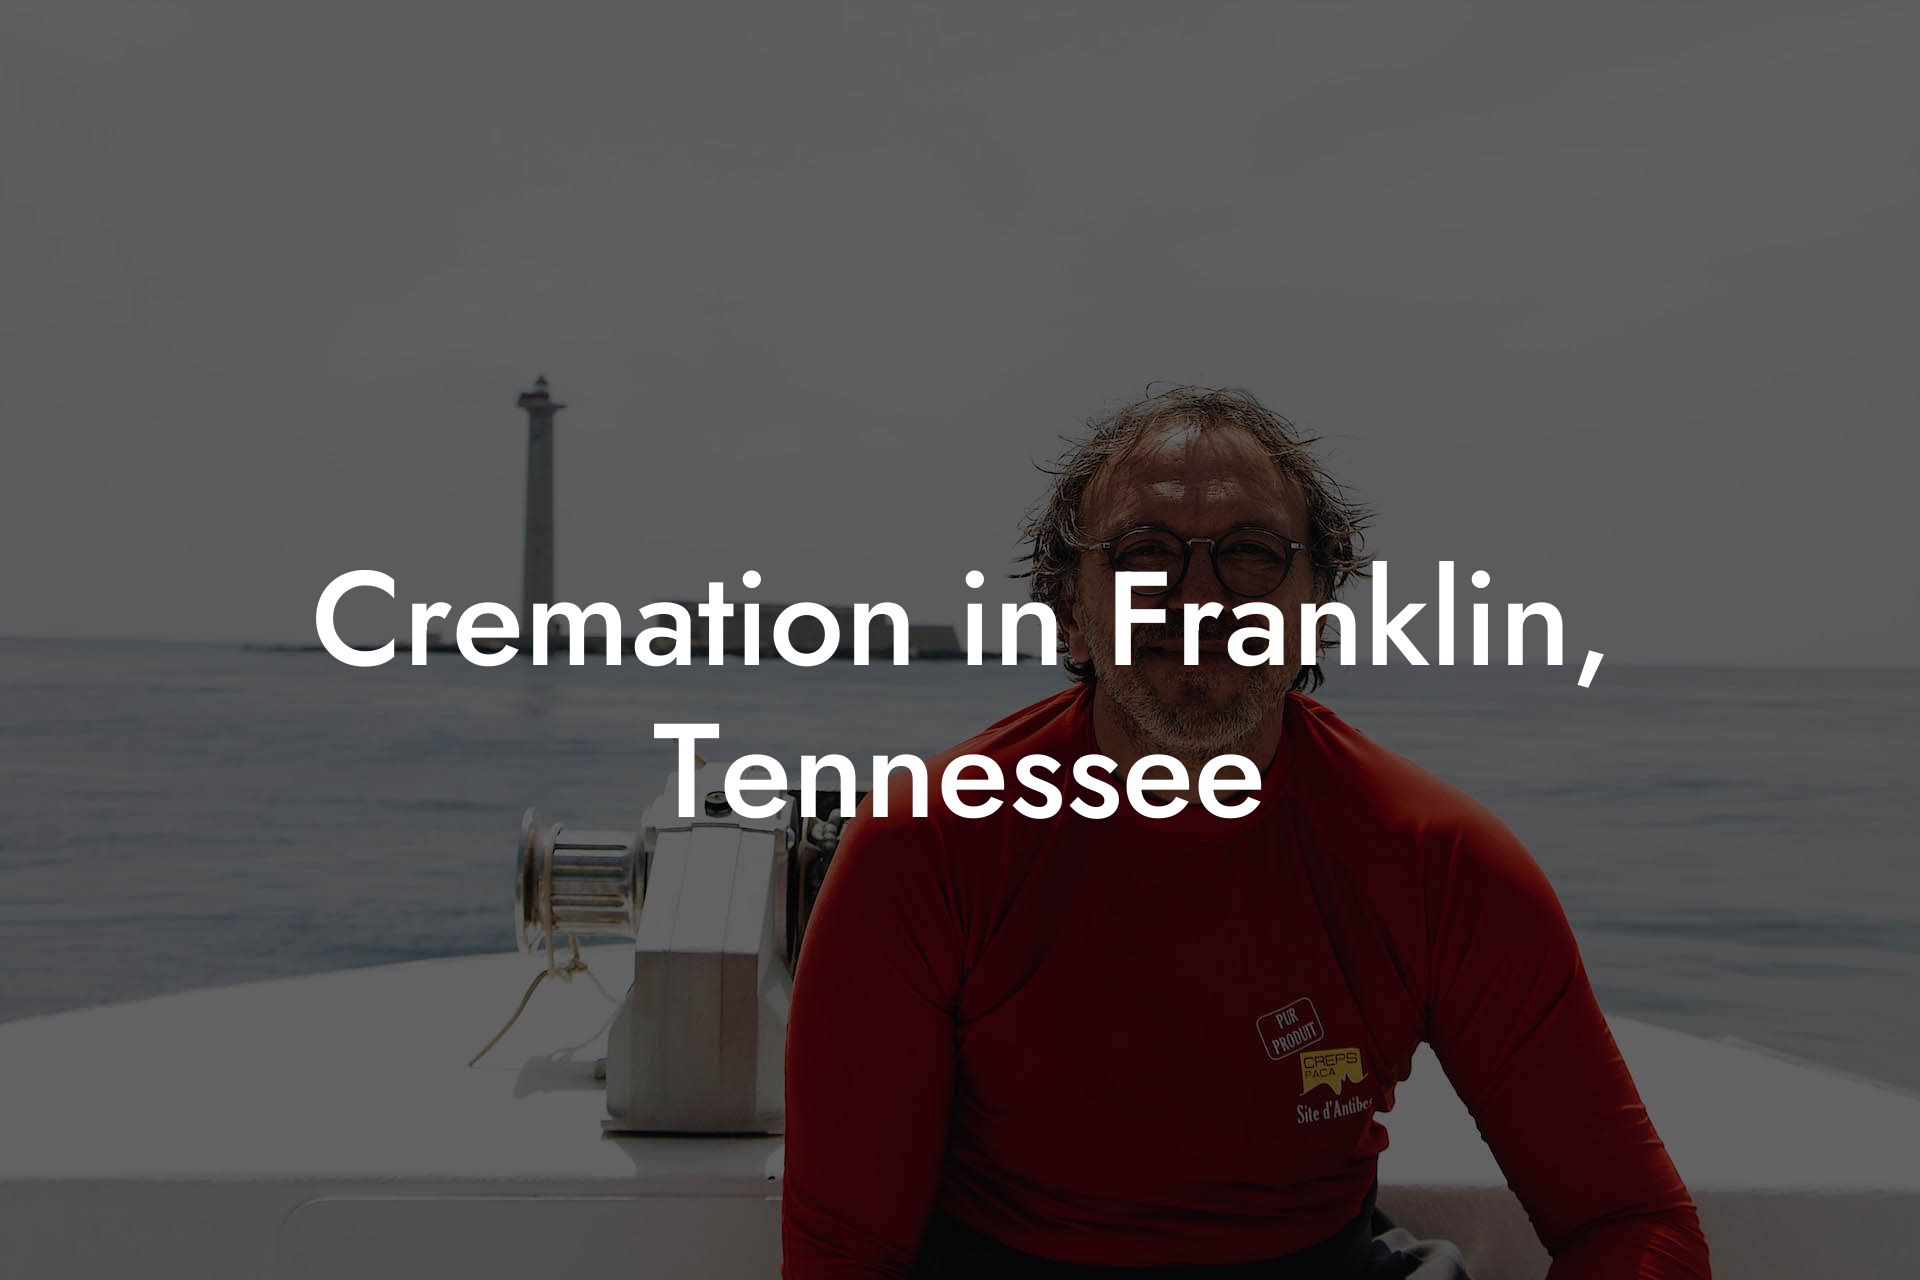 Cremation in Franklin, Tennessee